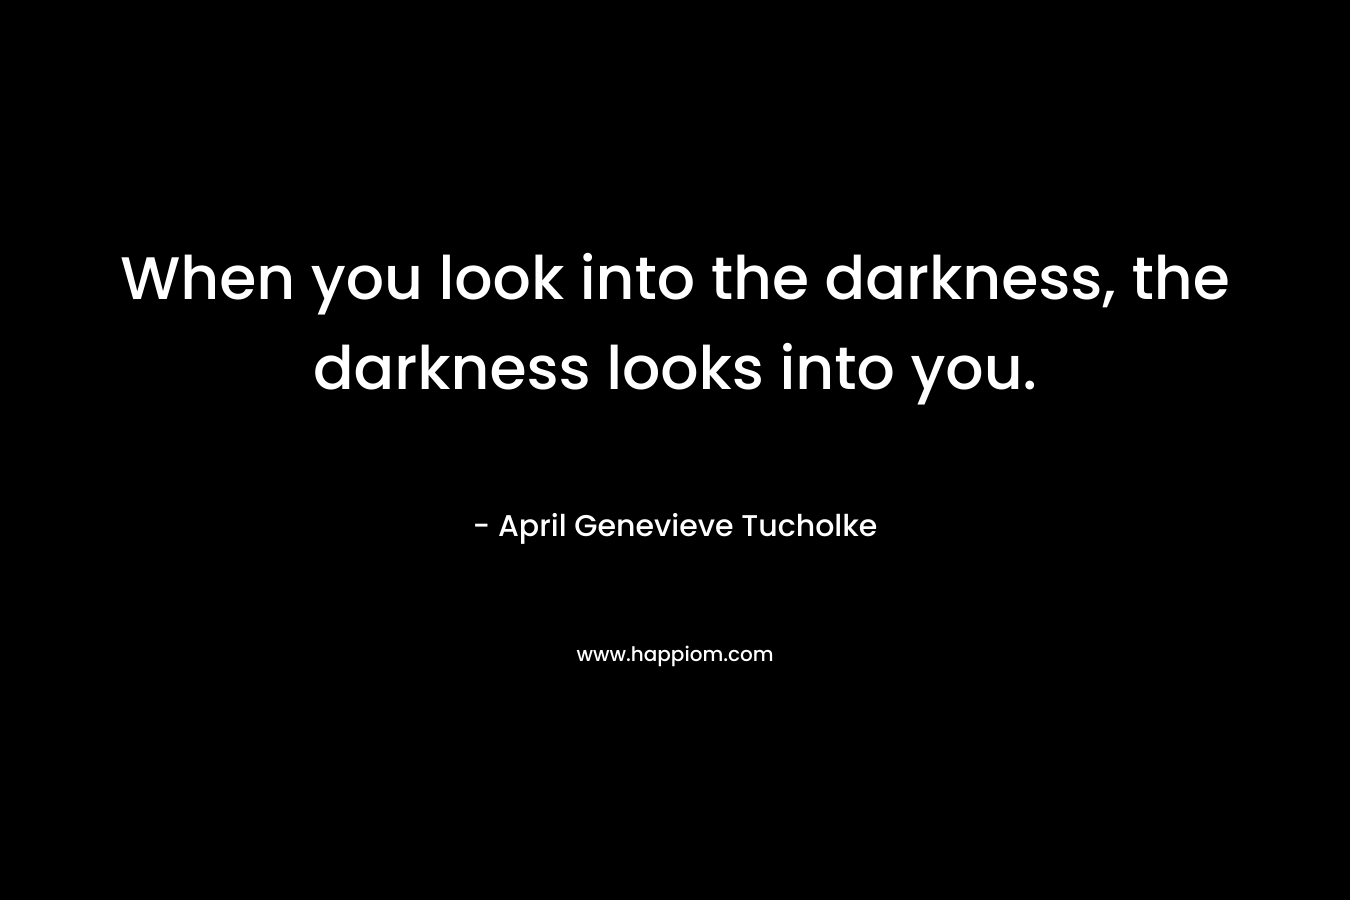 When you look into the darkness, the darkness looks into you.